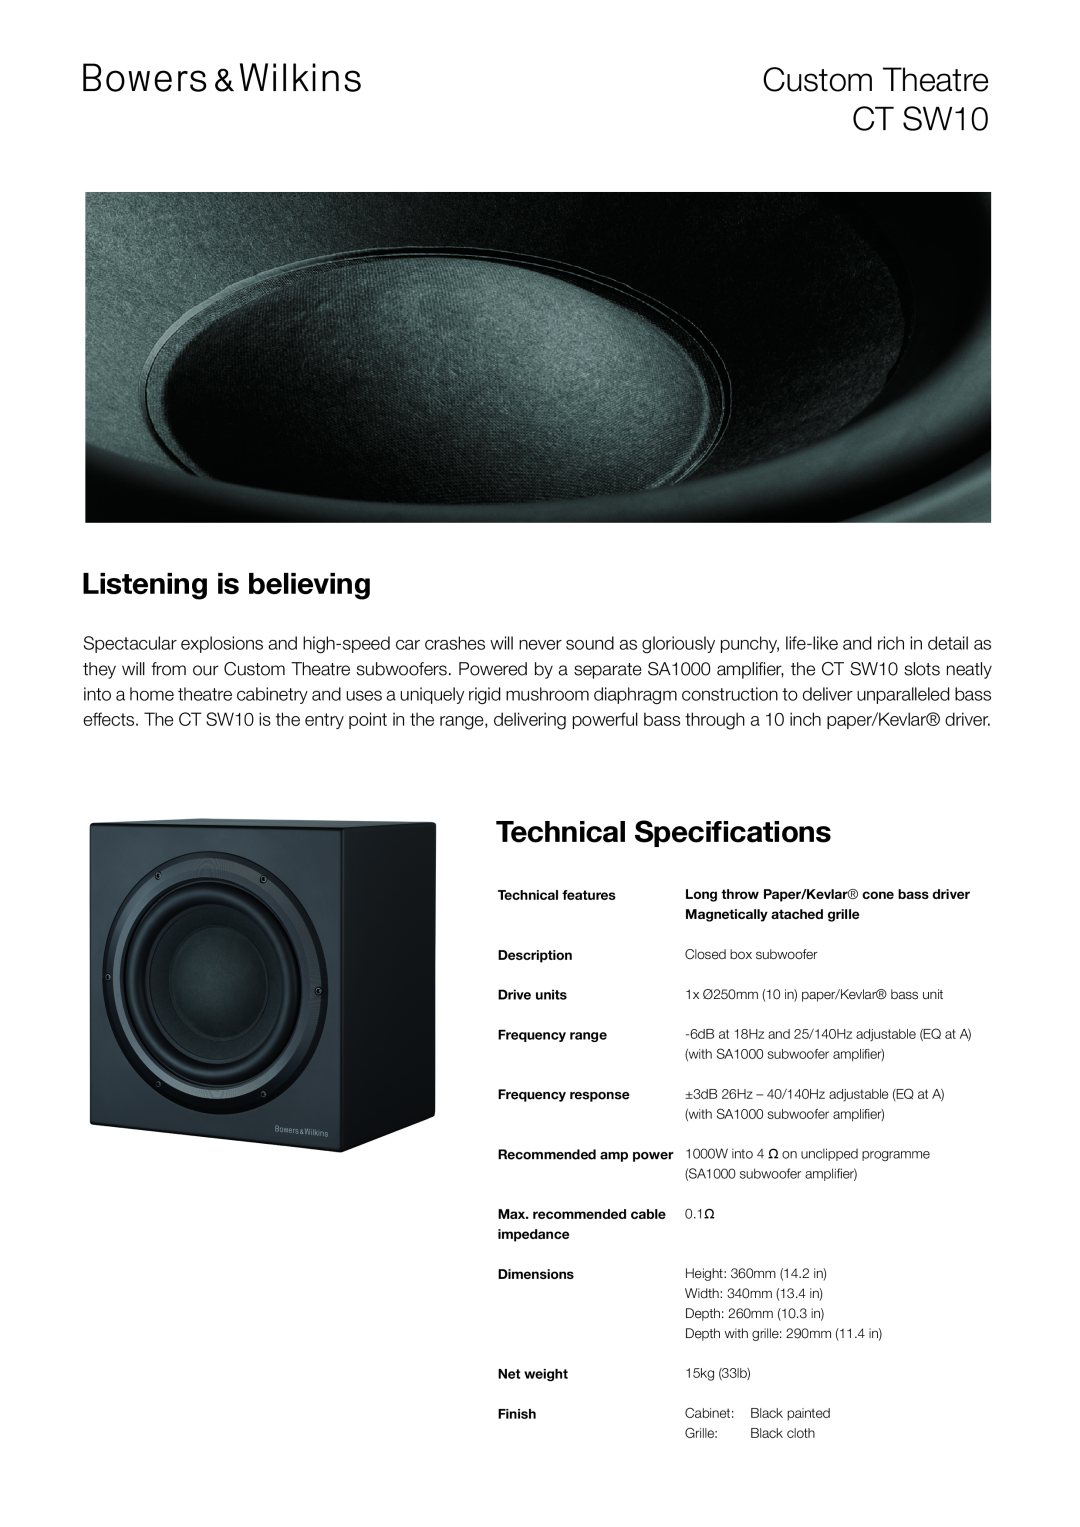 Bowers & Wilkins dimensions Custom Theatre CT SW10, Listening is believing, Technical Specifications 